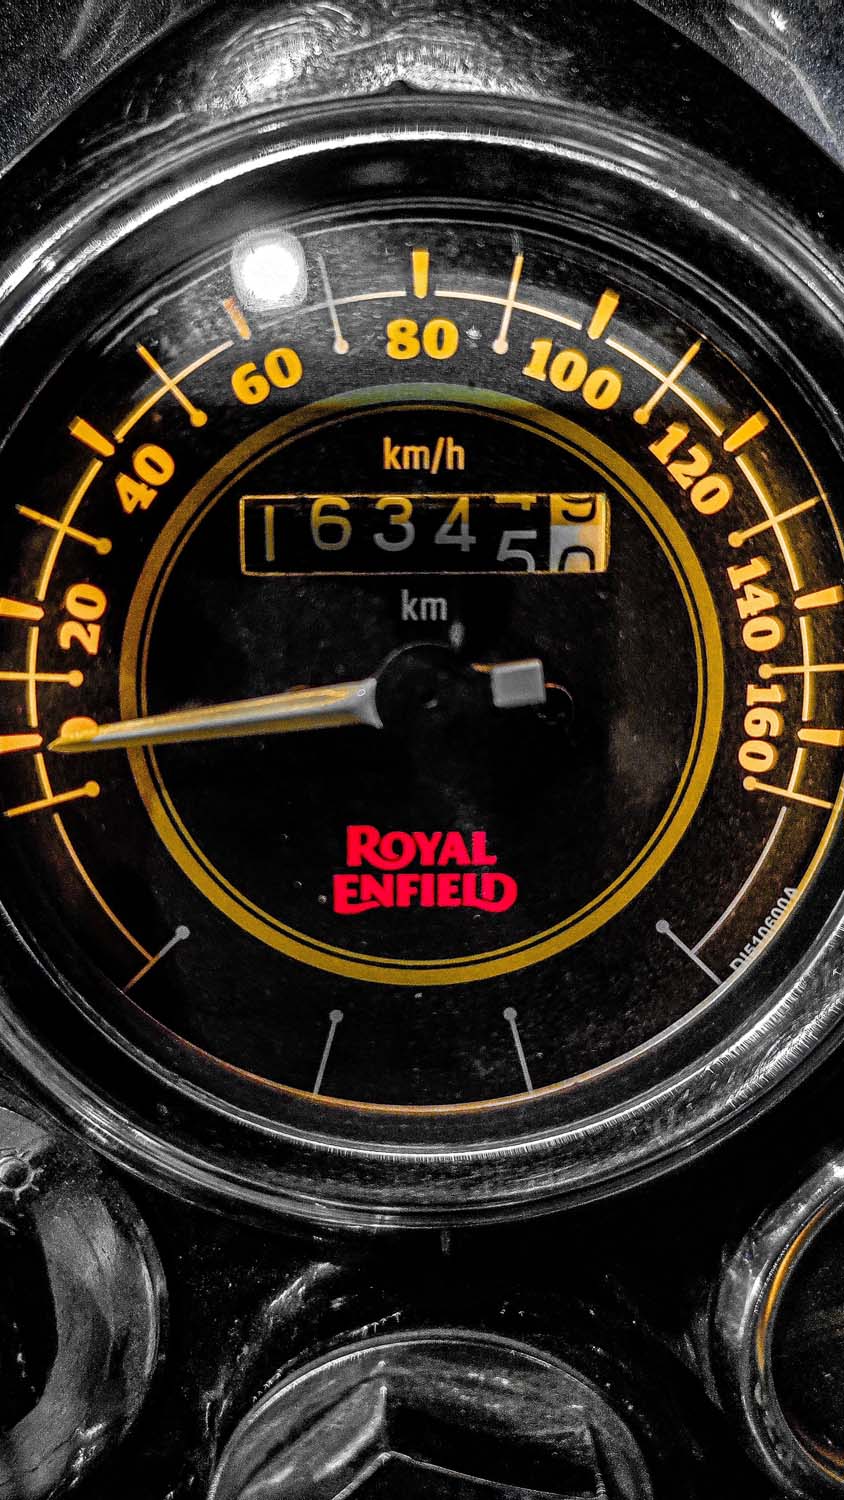 Royal Enfield Meter Console iPhone Wallpaper HD